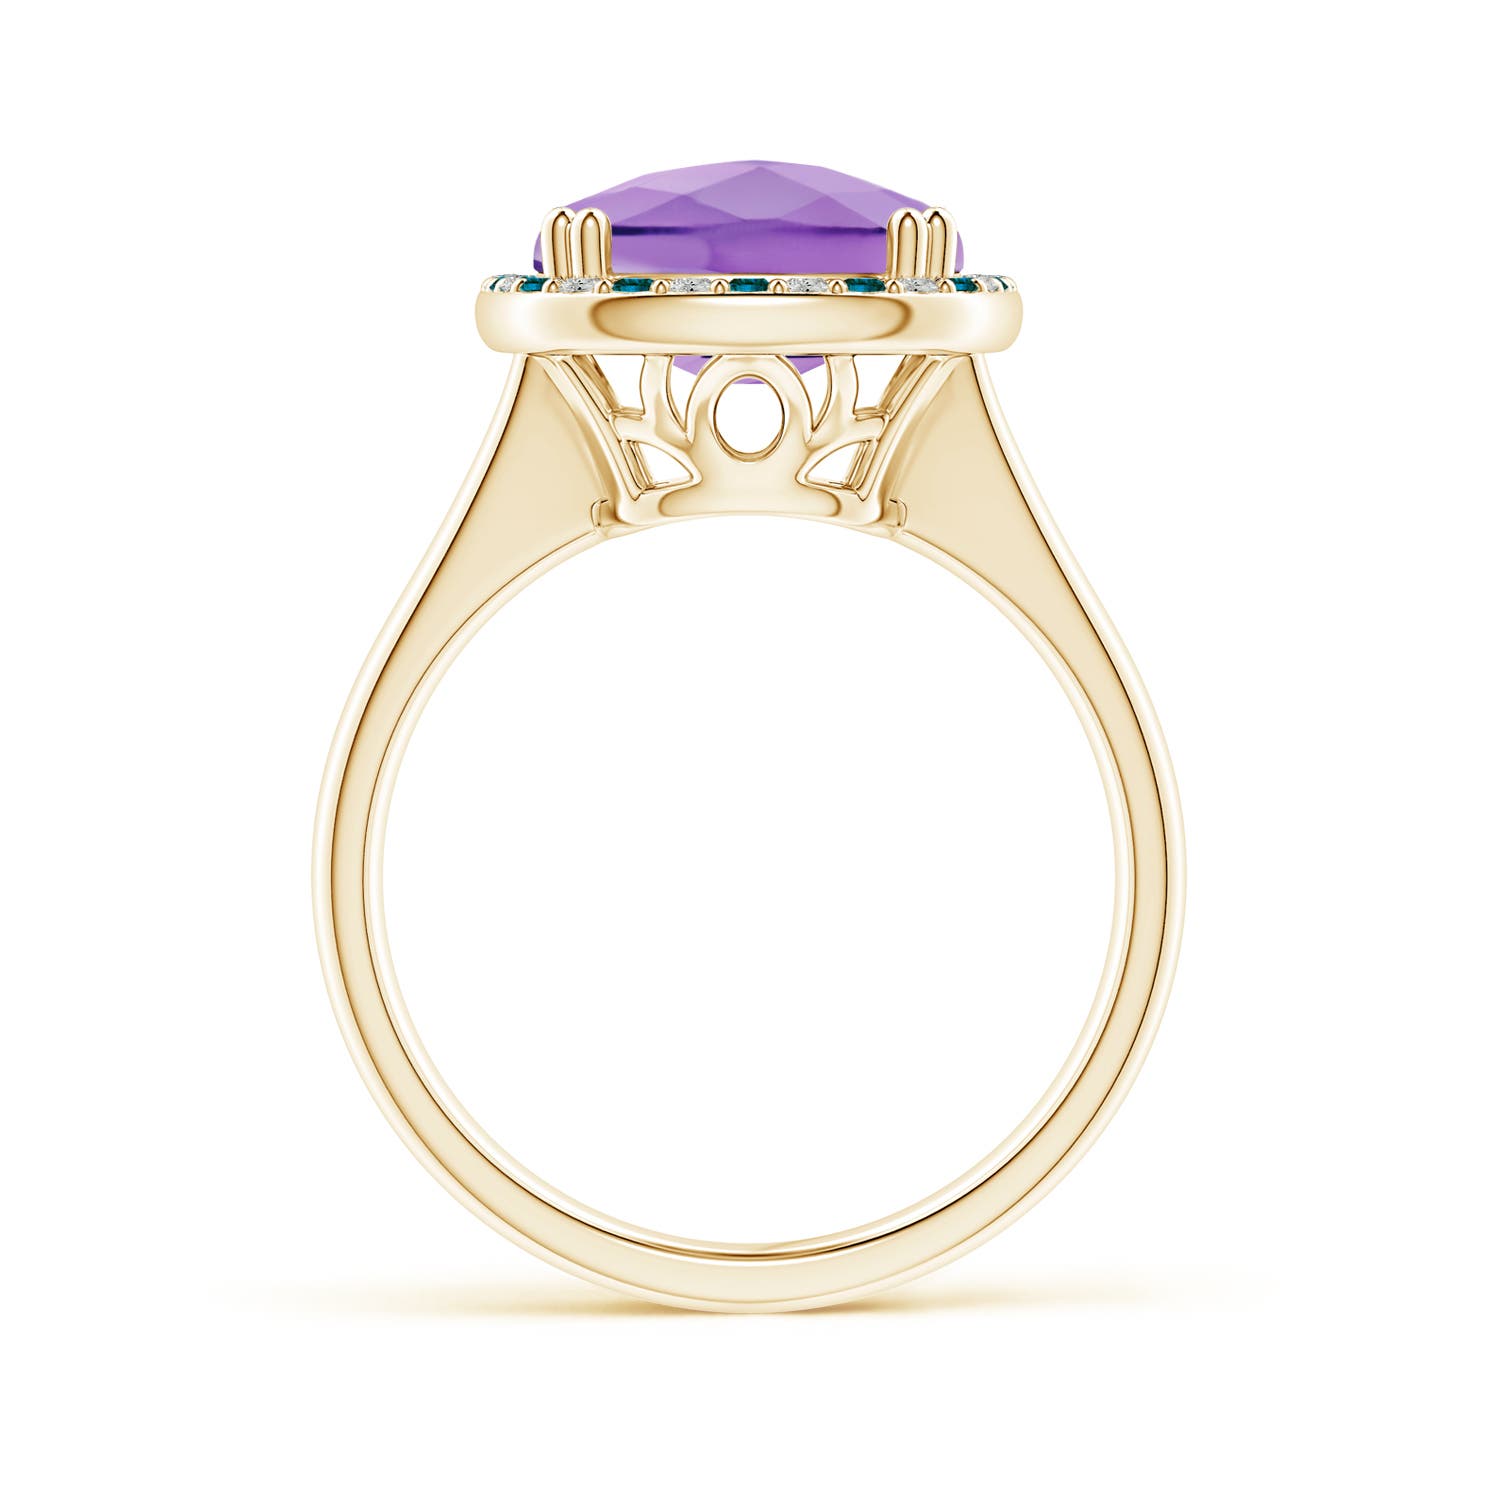 A - Amethyst / 6.27 CT / 14 KT Yellow Gold